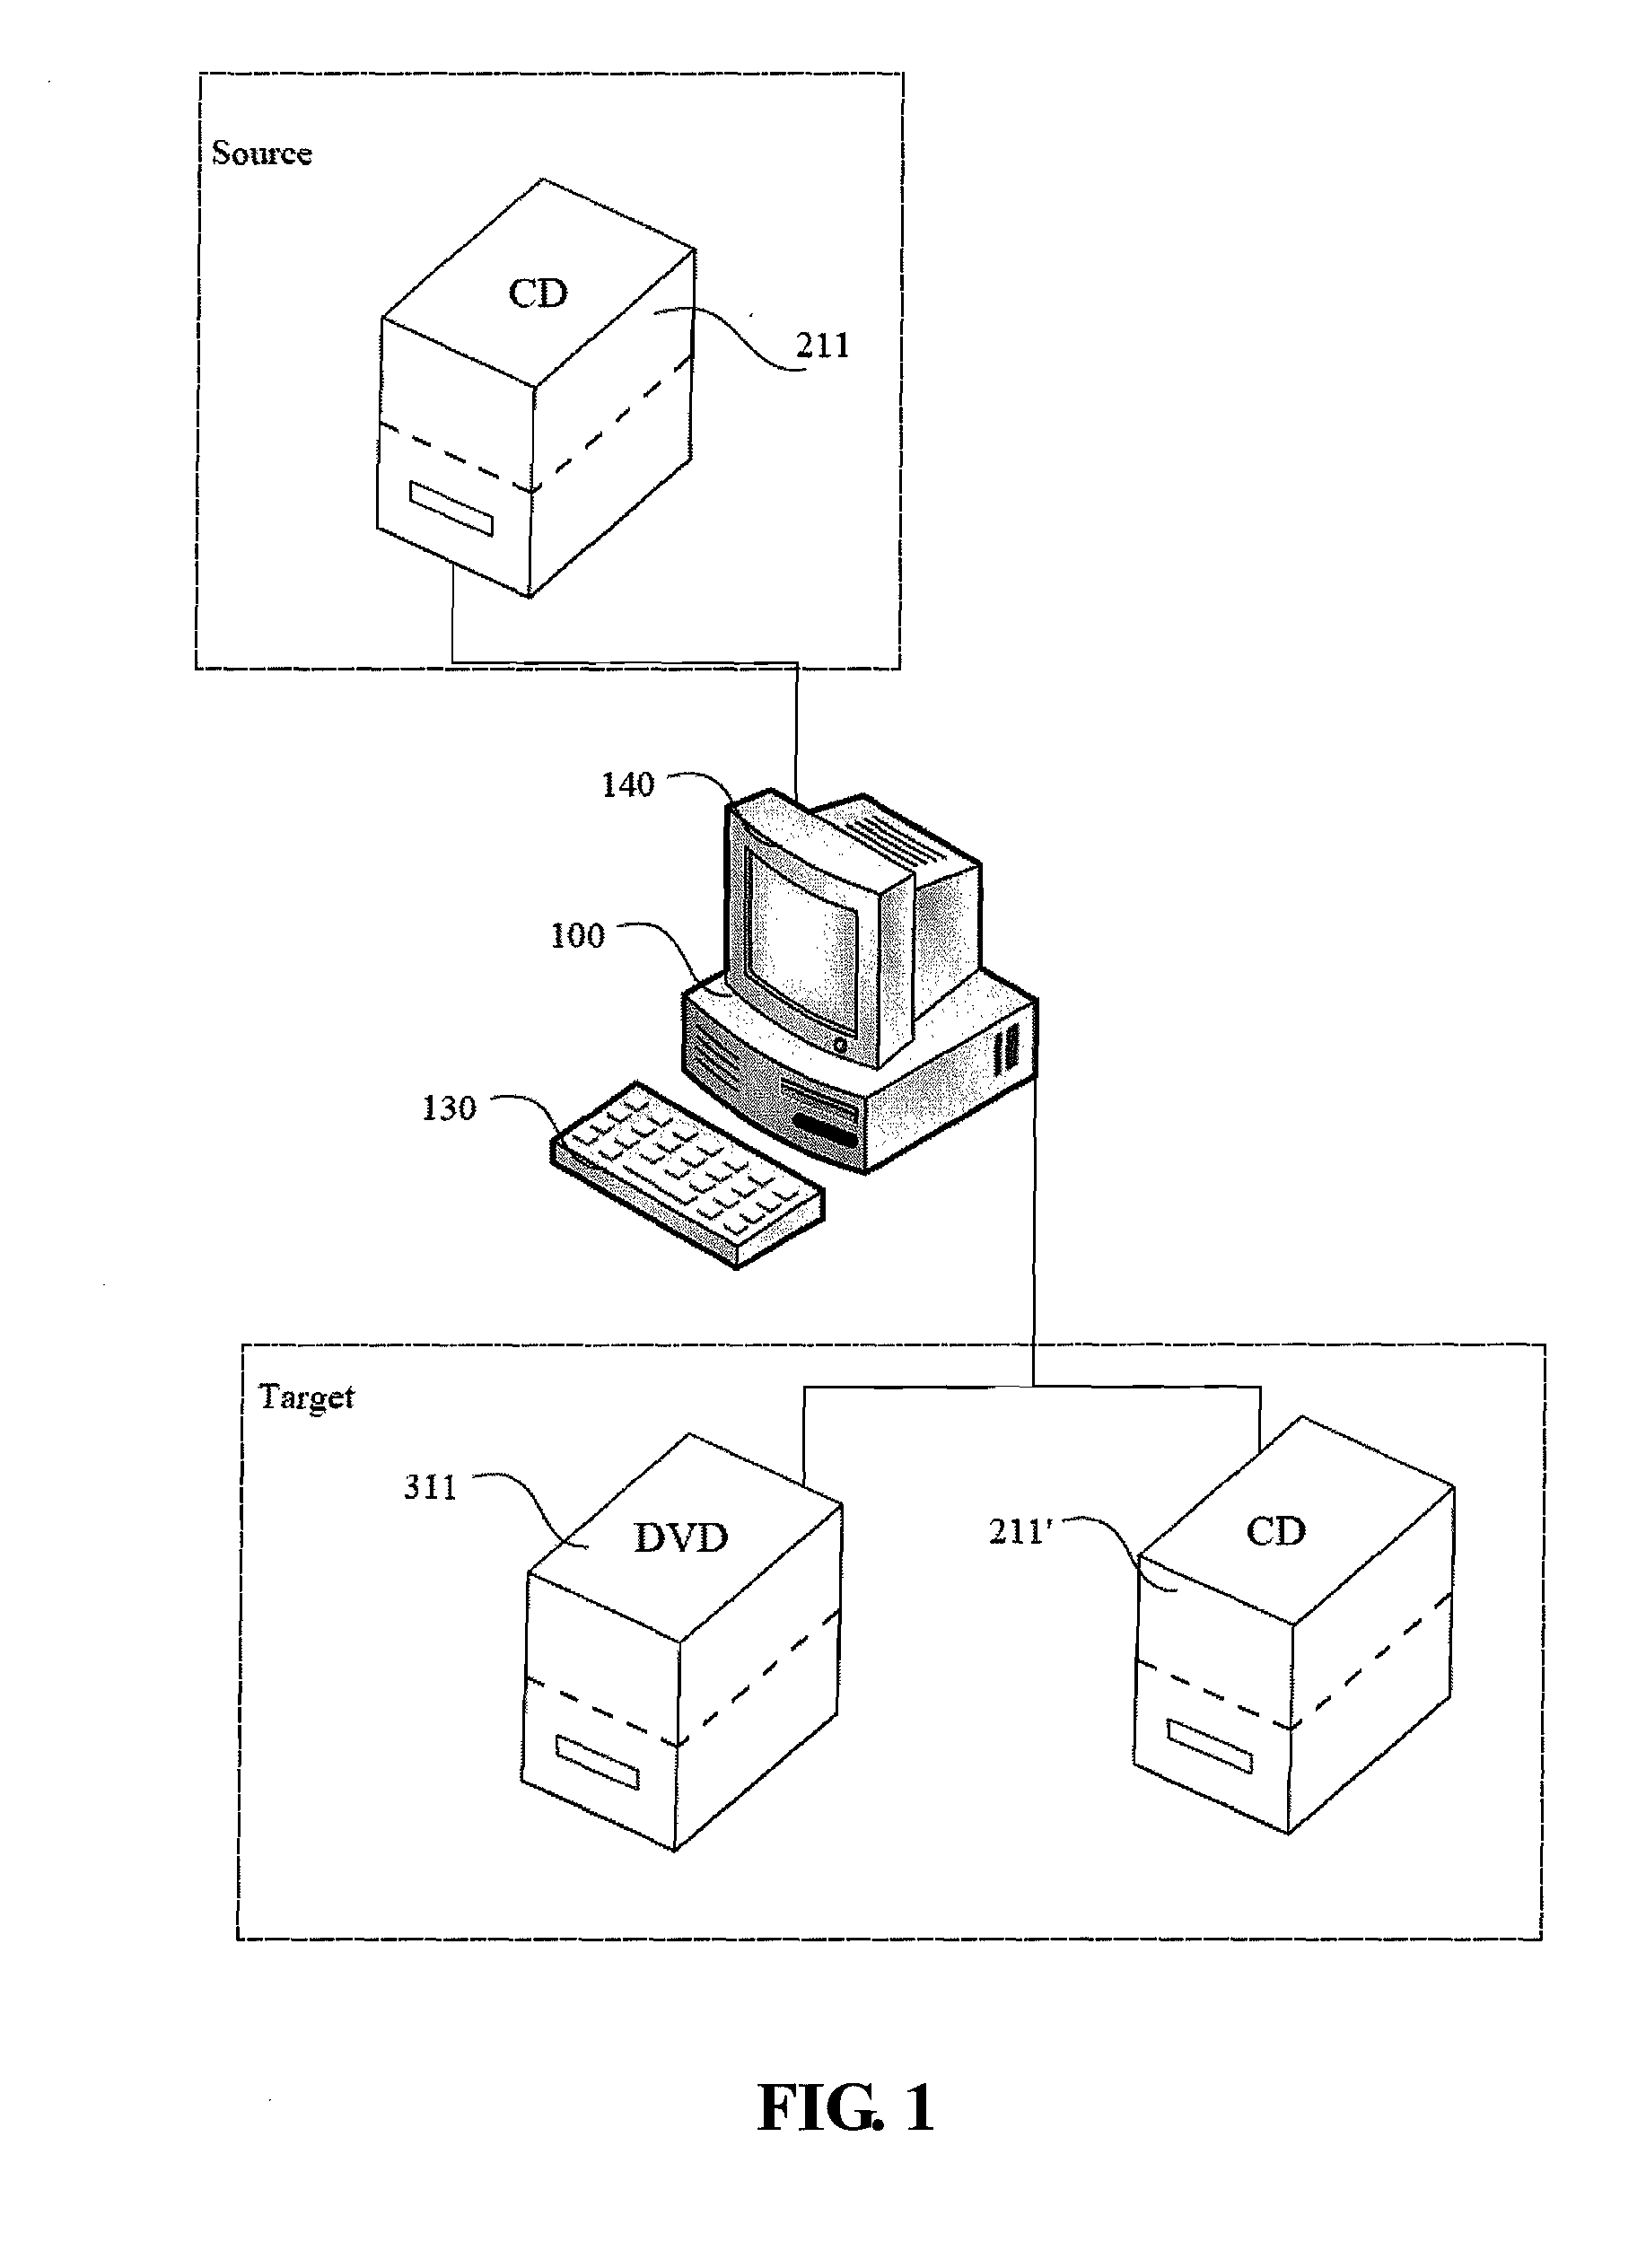 Reproducing system for mediums and method for reproducing digital data and identifying the same